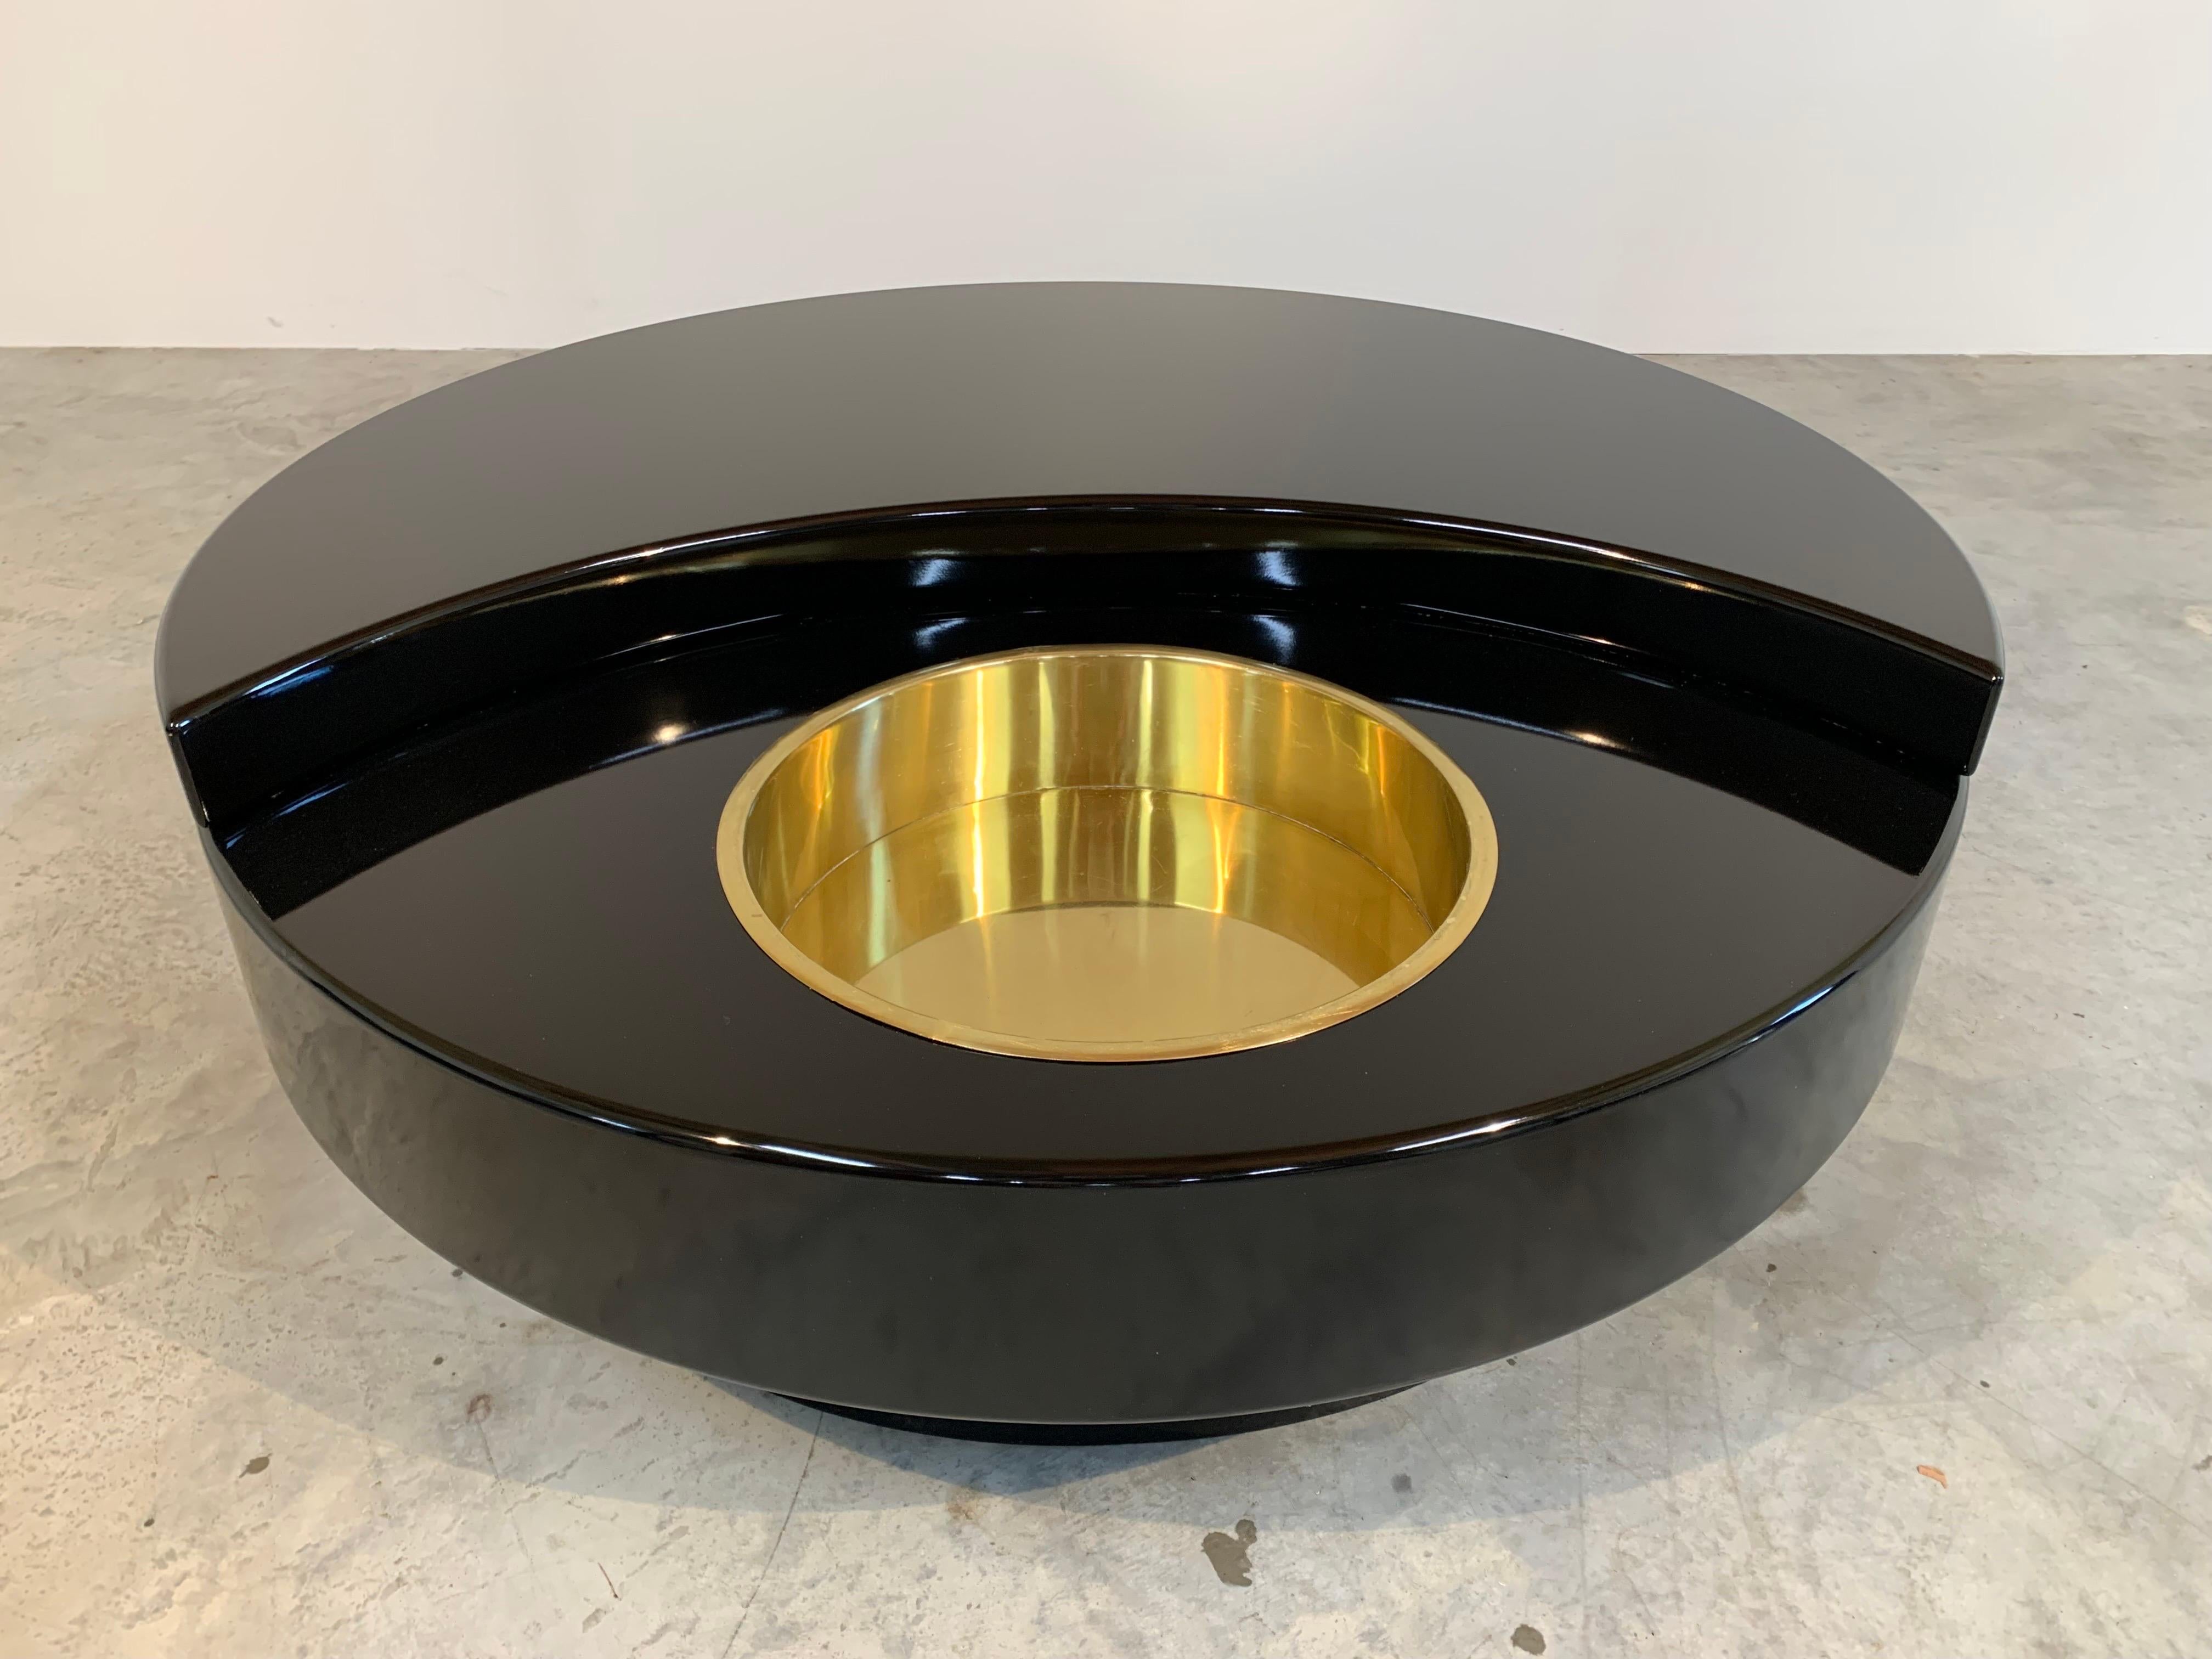 TRG (Tavolo rotondo girevole) round revolving cocktail table designed by Willy Rizzo. Italy, Mario Sabot, ca. 1970. 
Wood construction having black lacquer with robust internal track wheels that spin the top smoothly. Inserted into the first tear